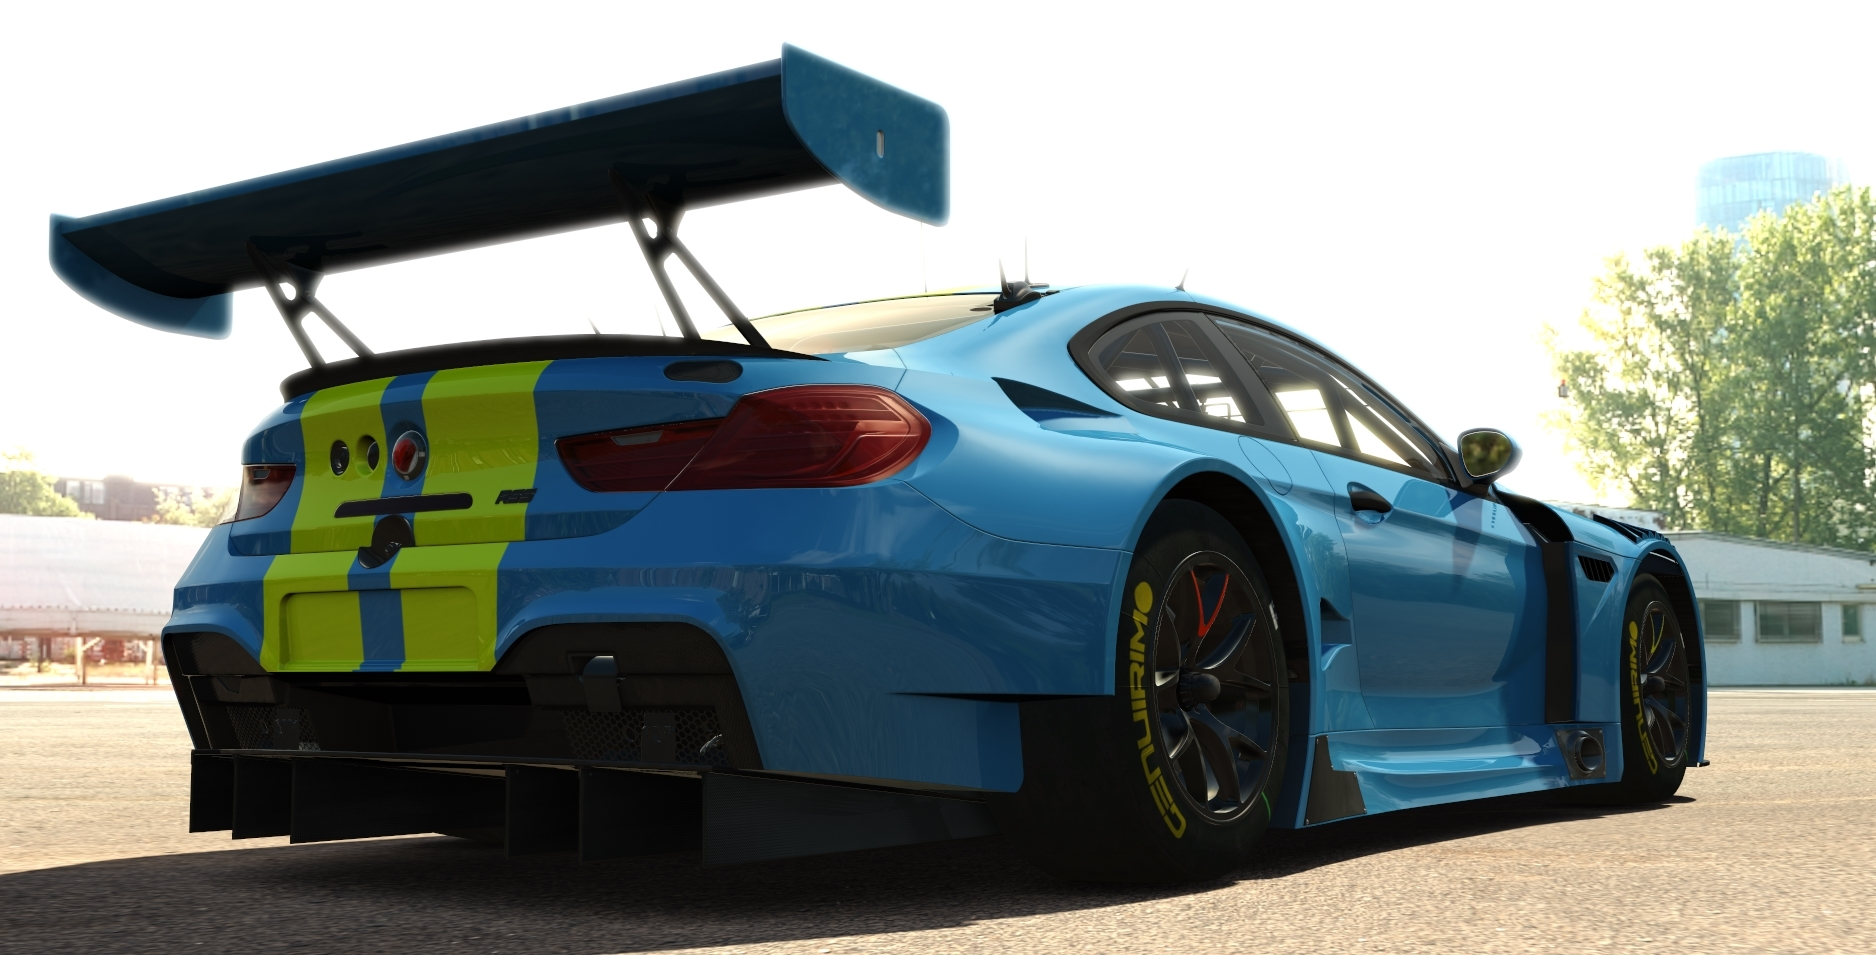 More information about "Assetto Corsa: GT3 2019 pack by Race Sim Studio in arrivo"